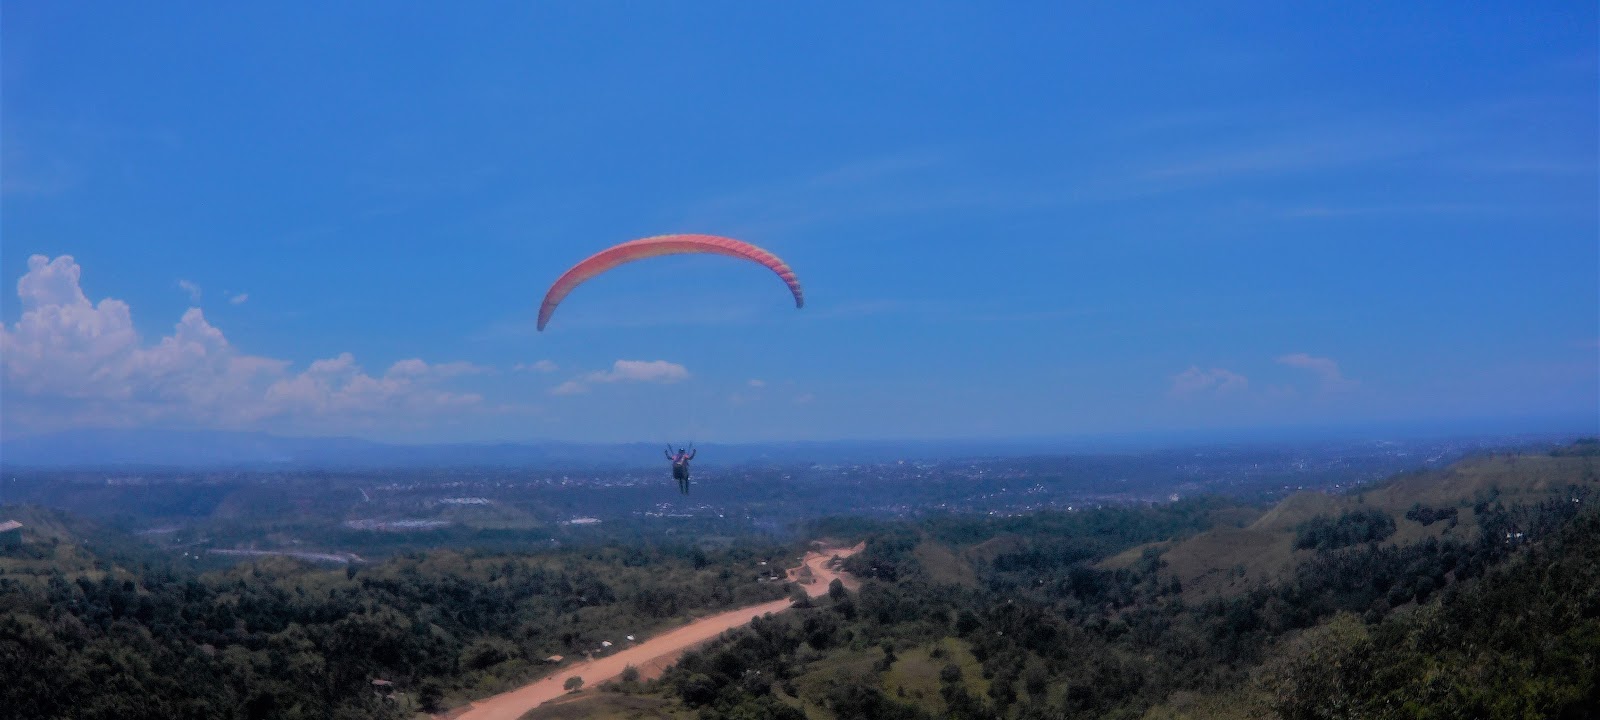 Paragliding in Cagayan de Oro: Things You Need To Know